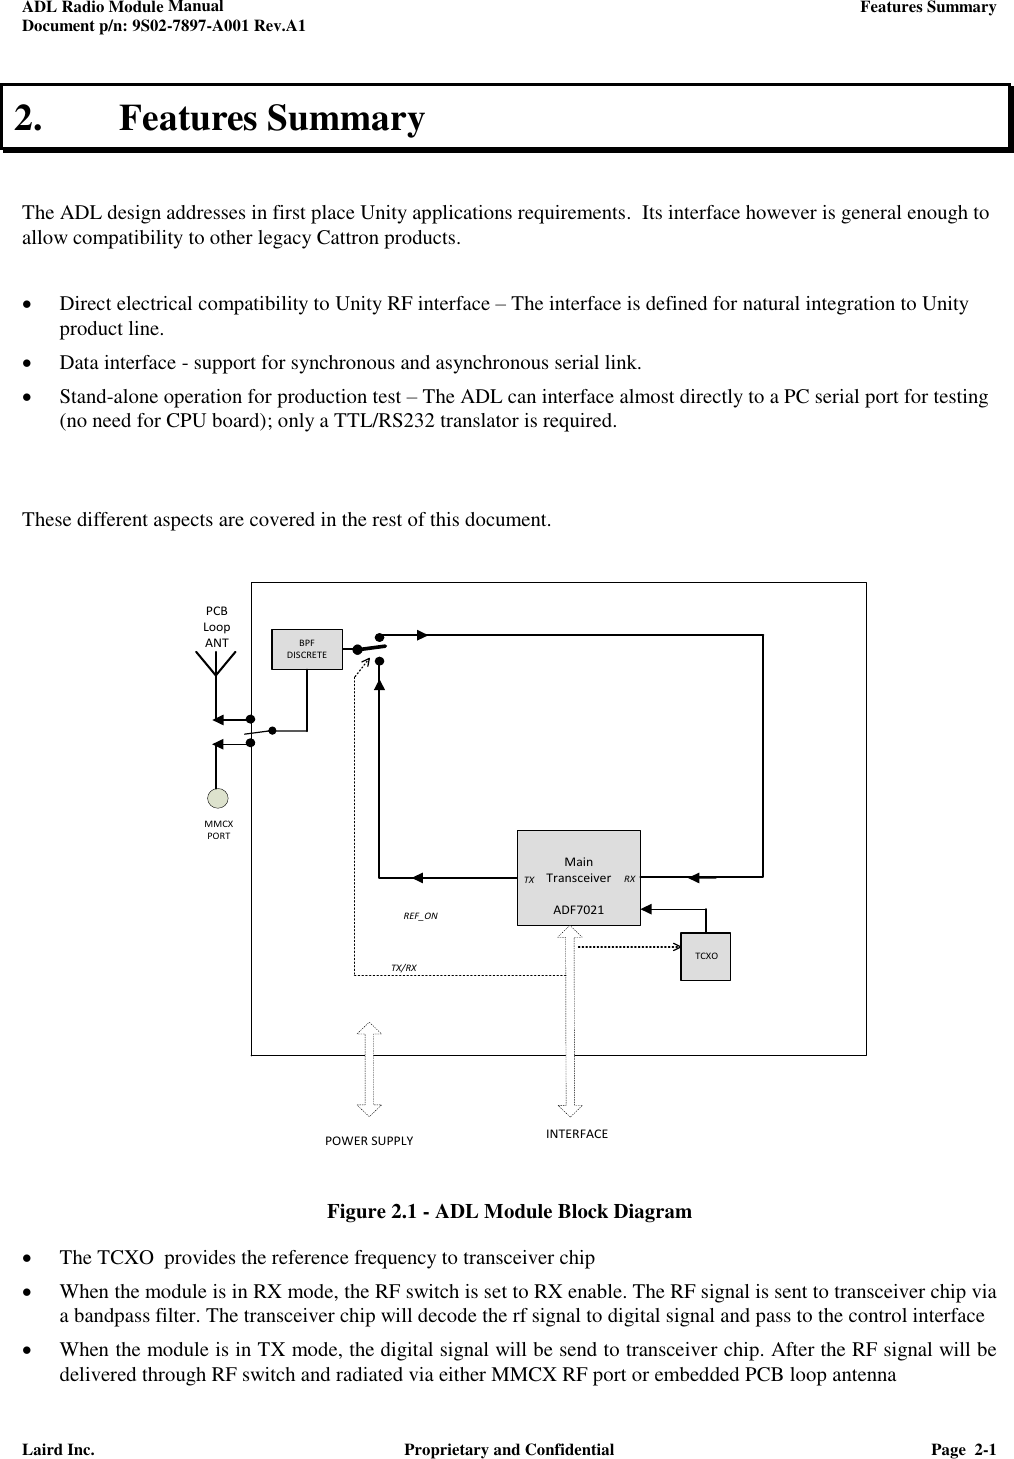 ADL Radio Module Manual     Features Summary  Document p/n: 9S02-7897-A001 Rev.A1  Laird Inc.  Proprietary and Confidential  Page  2-1  2. Features Summary   The ADL design addresses in first place Unity applications requirements.  Its interface however is general enough to allow compatibility to other legacy Cattron products.    Direct electrical compatibility to Unity RF interface – The interface is defined for natural integration to Unity product line.   Data interface - support for synchronous and asynchronous serial link.  Stand-alone operation for production test – The ADL can interface almost directly to a PC serial port for testing  (no need for CPU board); only a TTL/RS232 translator is required.    These different aspects are covered in the rest of this document.                     Figure 2.1 - ADL Module Block Diagram  The TCXO  provides the reference frequency to transceiver chip   When the module is in RX mode, the RF switch is set to RX enable. The RF signal is sent to transceiver chip via a bandpass filter. The transceiver chip will decode the rf signal to digital signal and pass to the control interface  When the module is in TX mode, the digital signal will be send to transceiver chip. After the RF signal will be delivered through RF switch and radiated via either MMCX RF port or embedded PCB loop antenna  PCB Loop ANTMainTransceiverADF7021  TX RX INTERFACETX/RXPOWER SUPPLY TCXOBPF DISCRETEREF_ONMMCX PORT